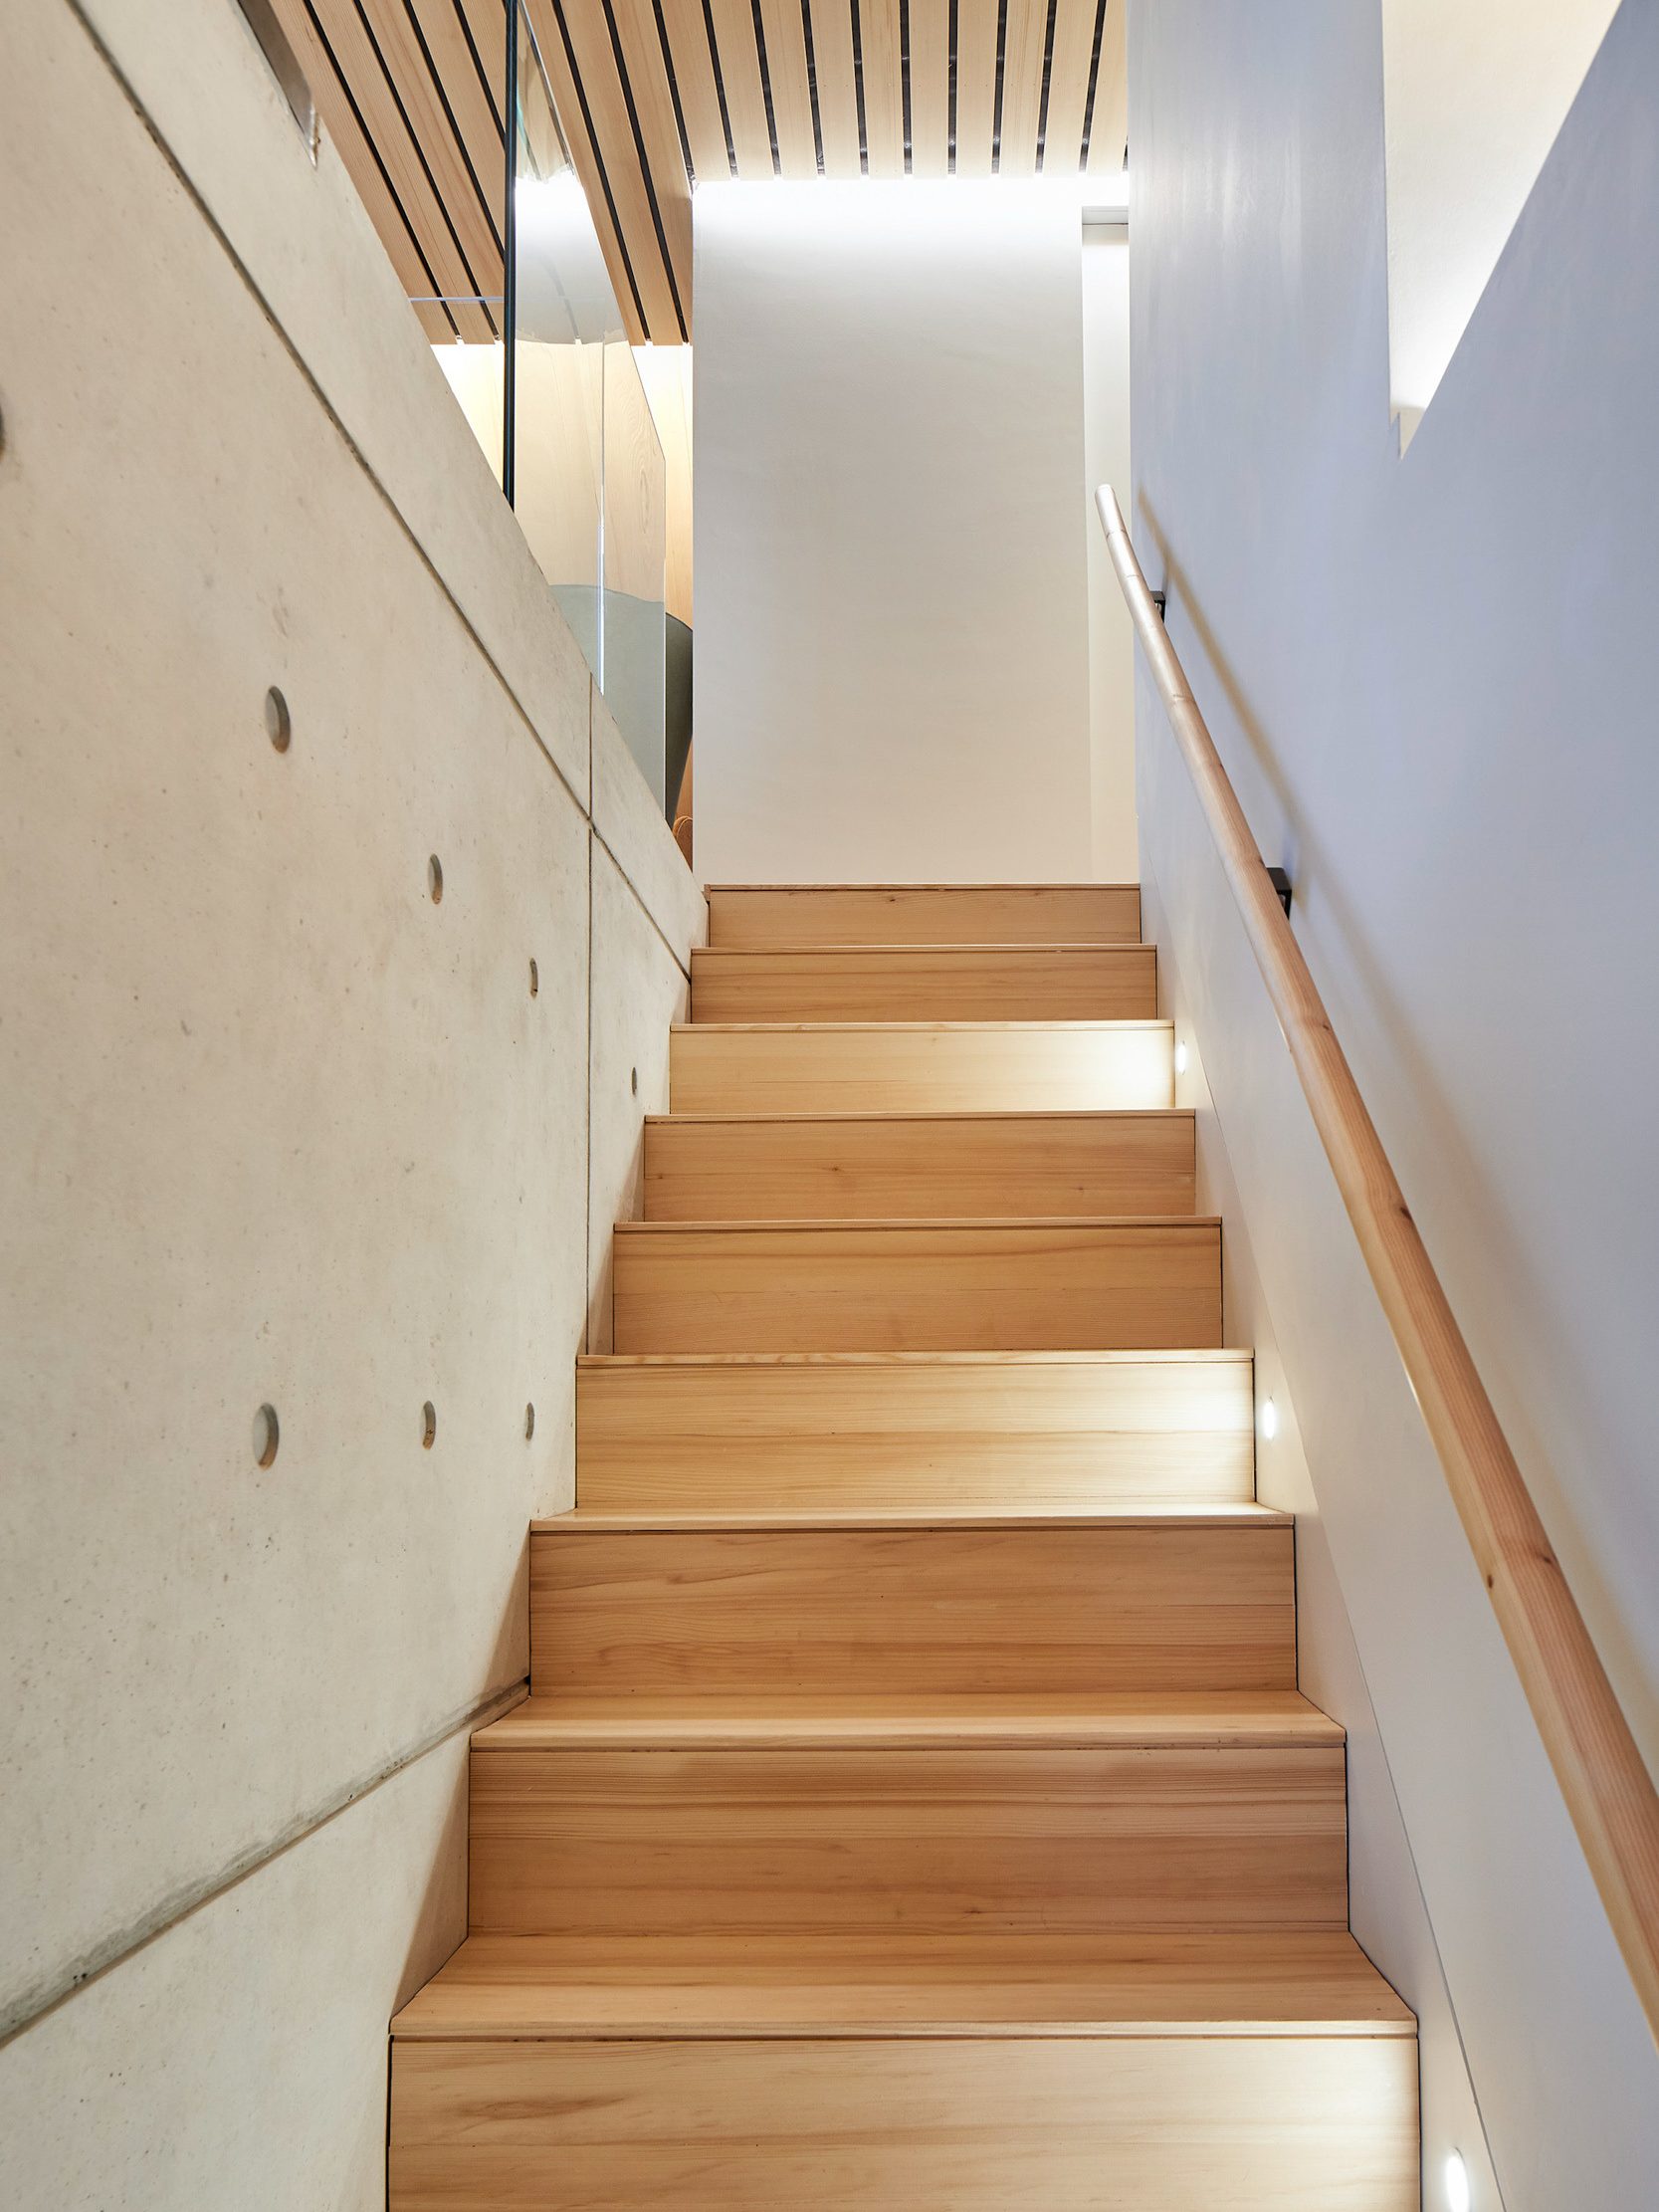 Timber and concrete stairs in house | cdc studio cambridge architects